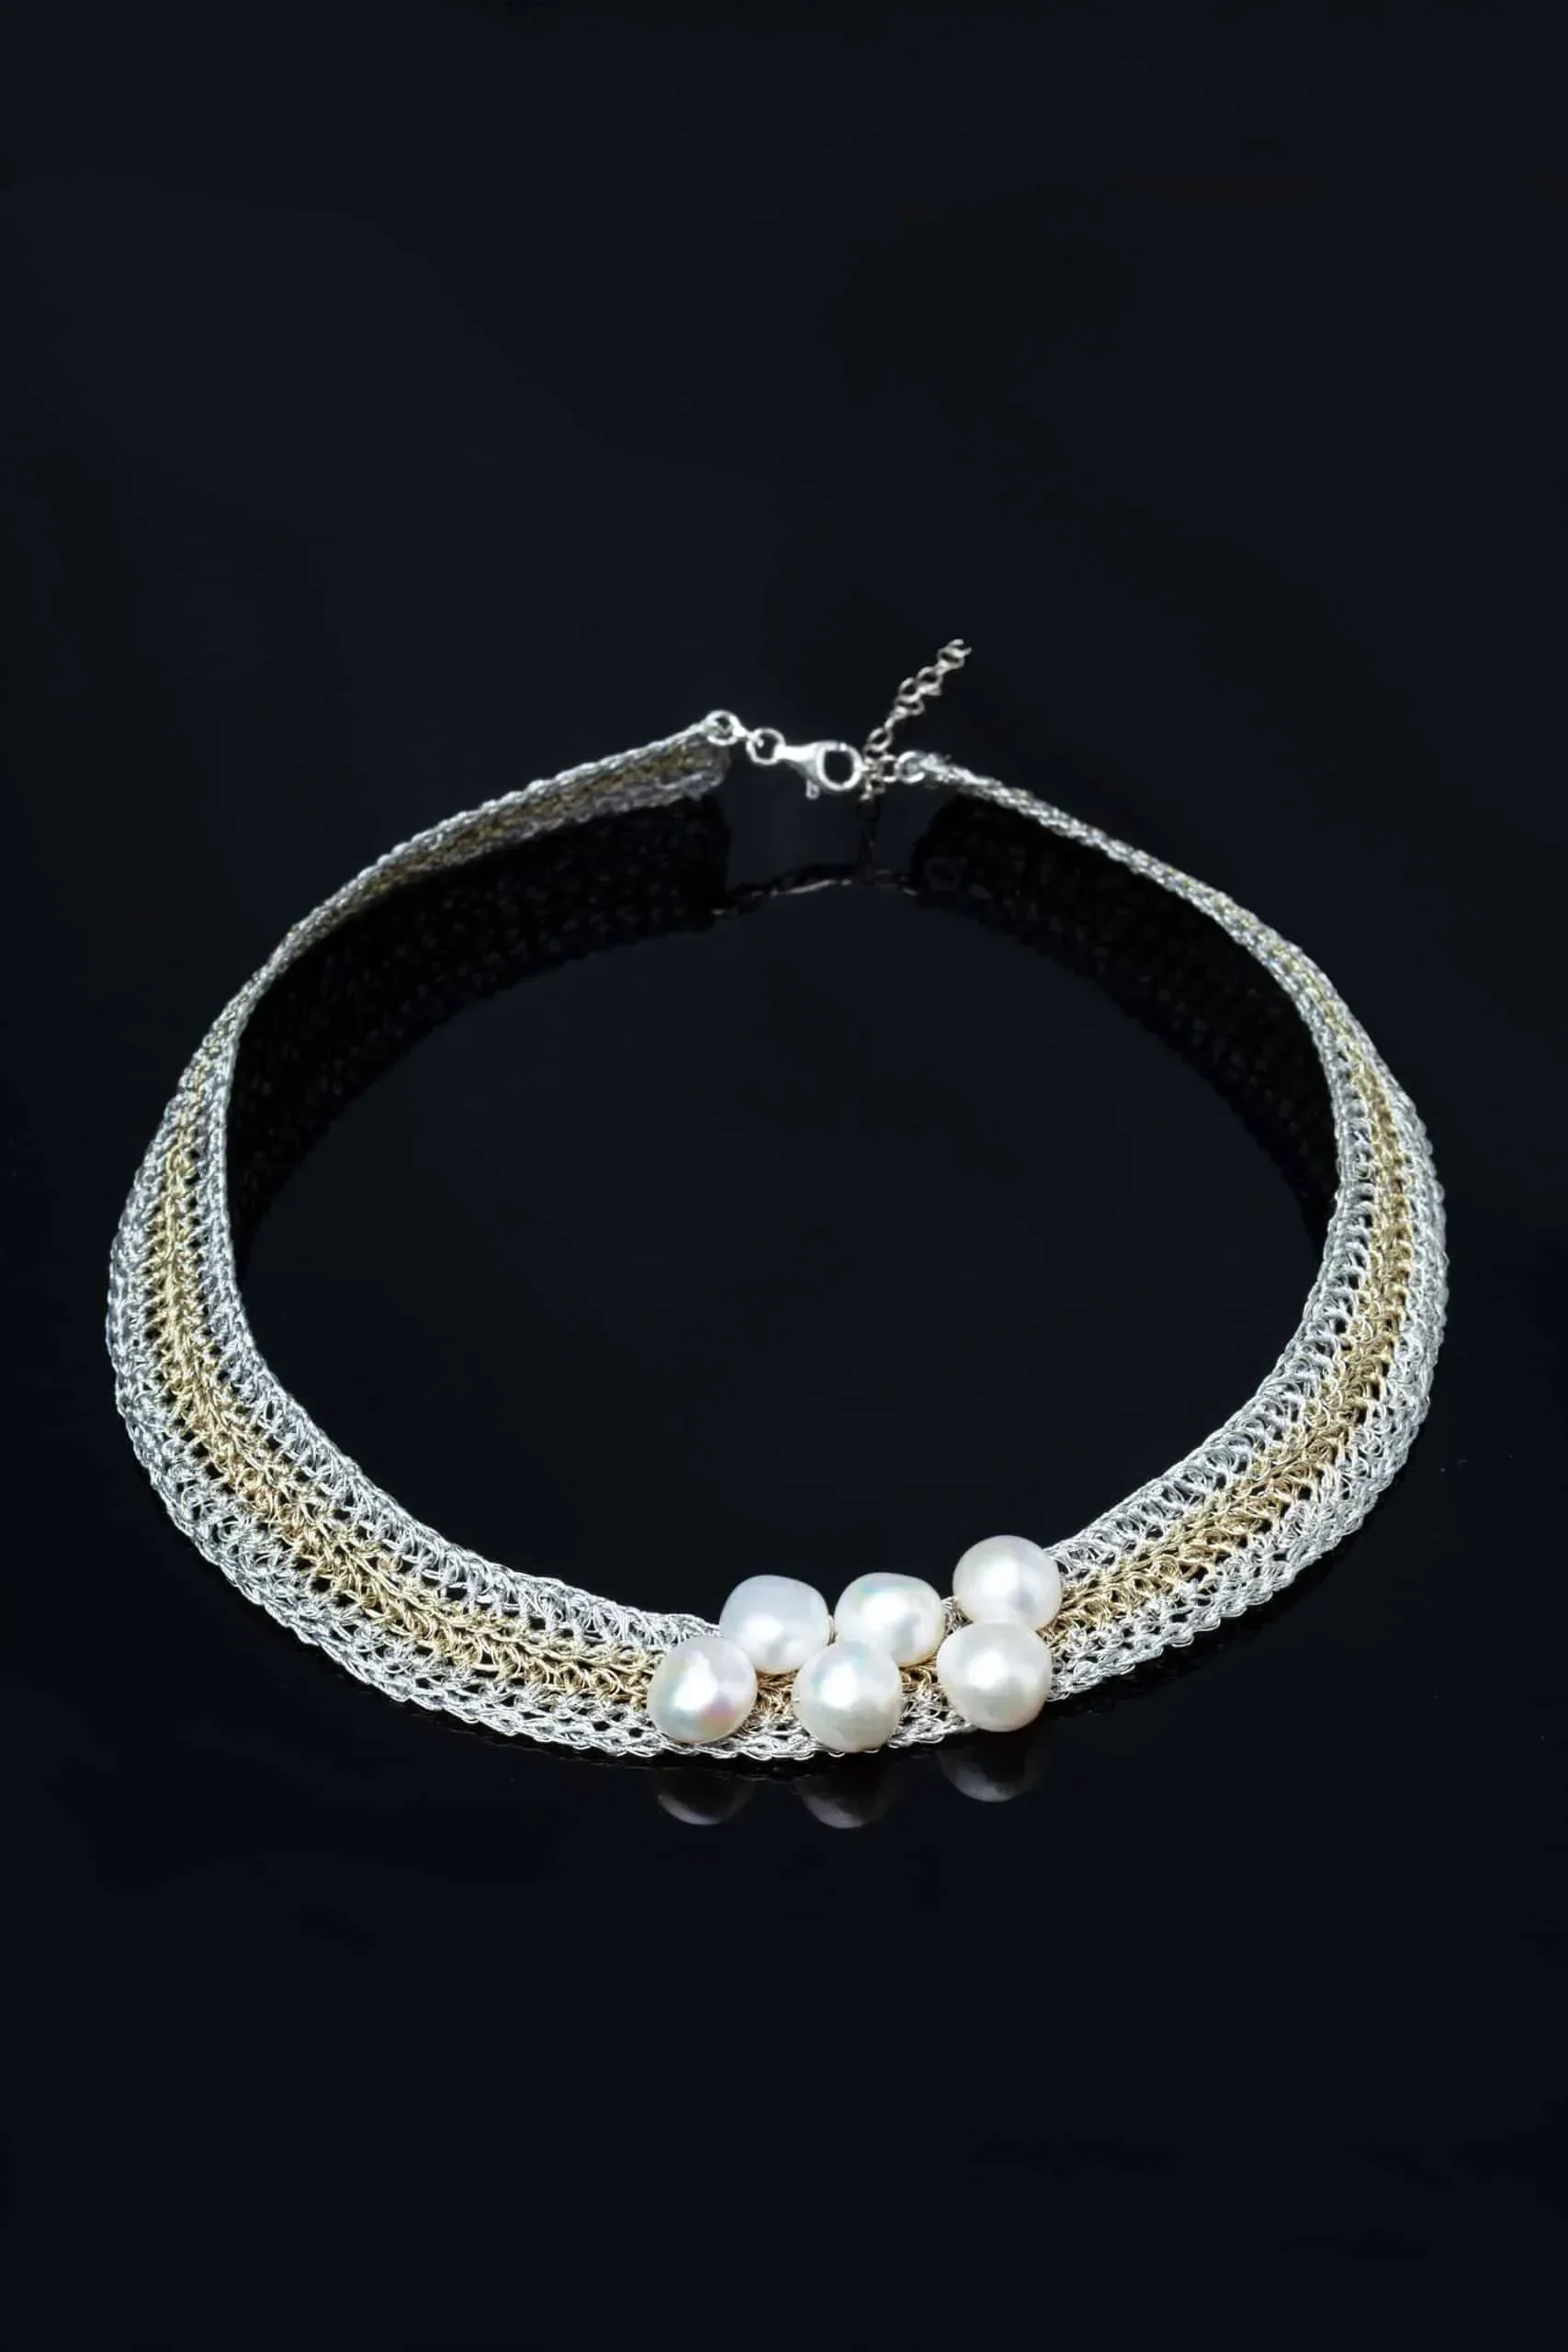 Handmade Jewellery | Crochet knit silver necklace with and pearls gallery 1